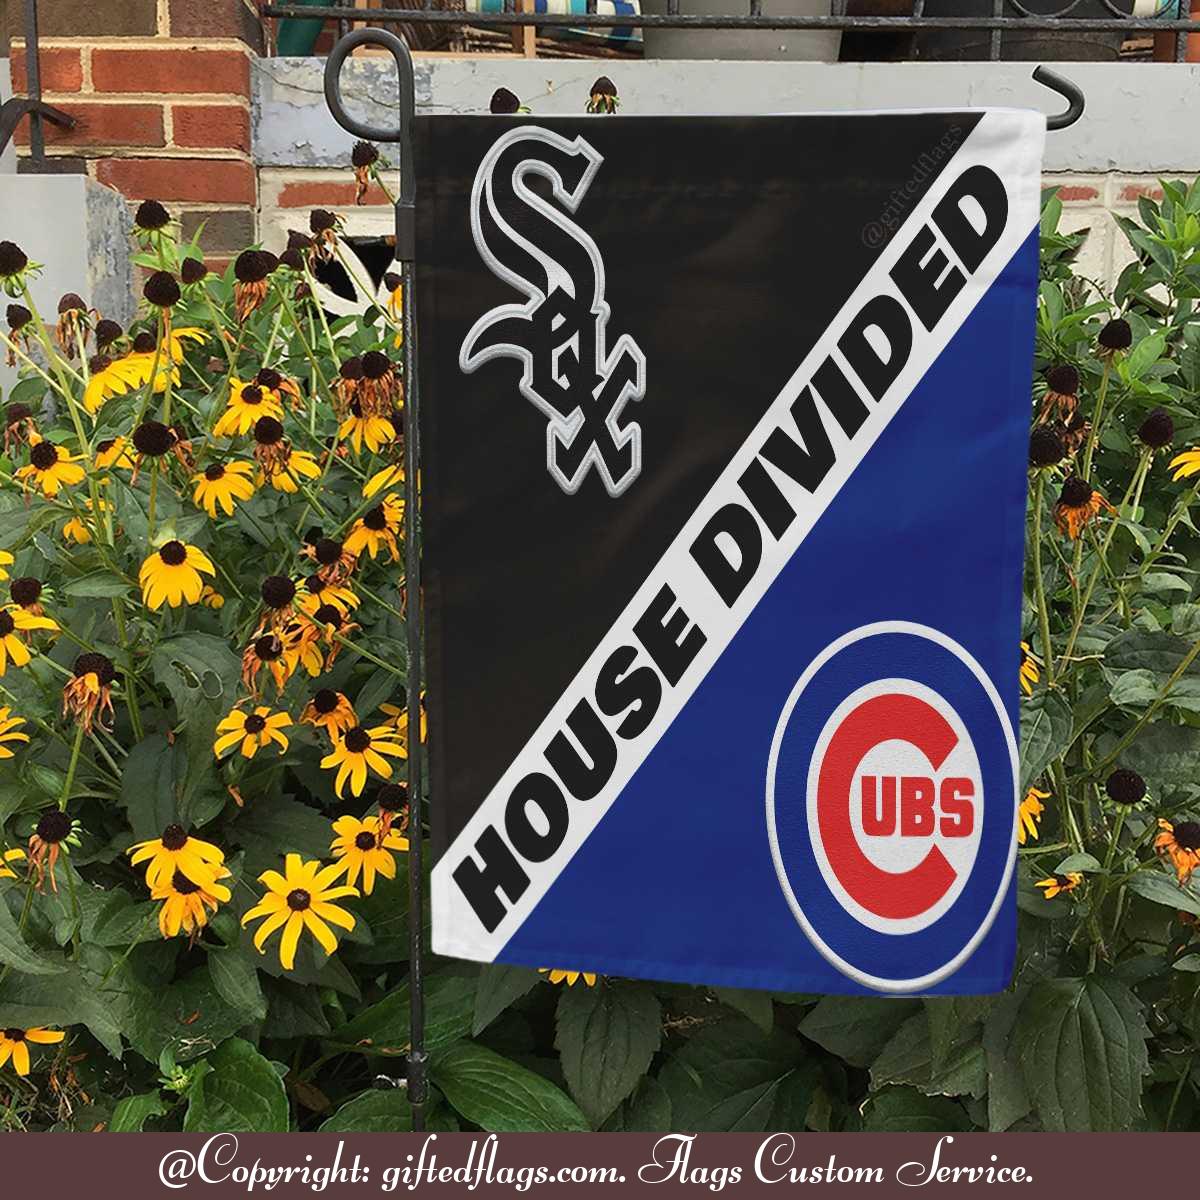 Chicago White Sox vs. Chicago Cubs House Divided Flag, White Sox House Divided Flag